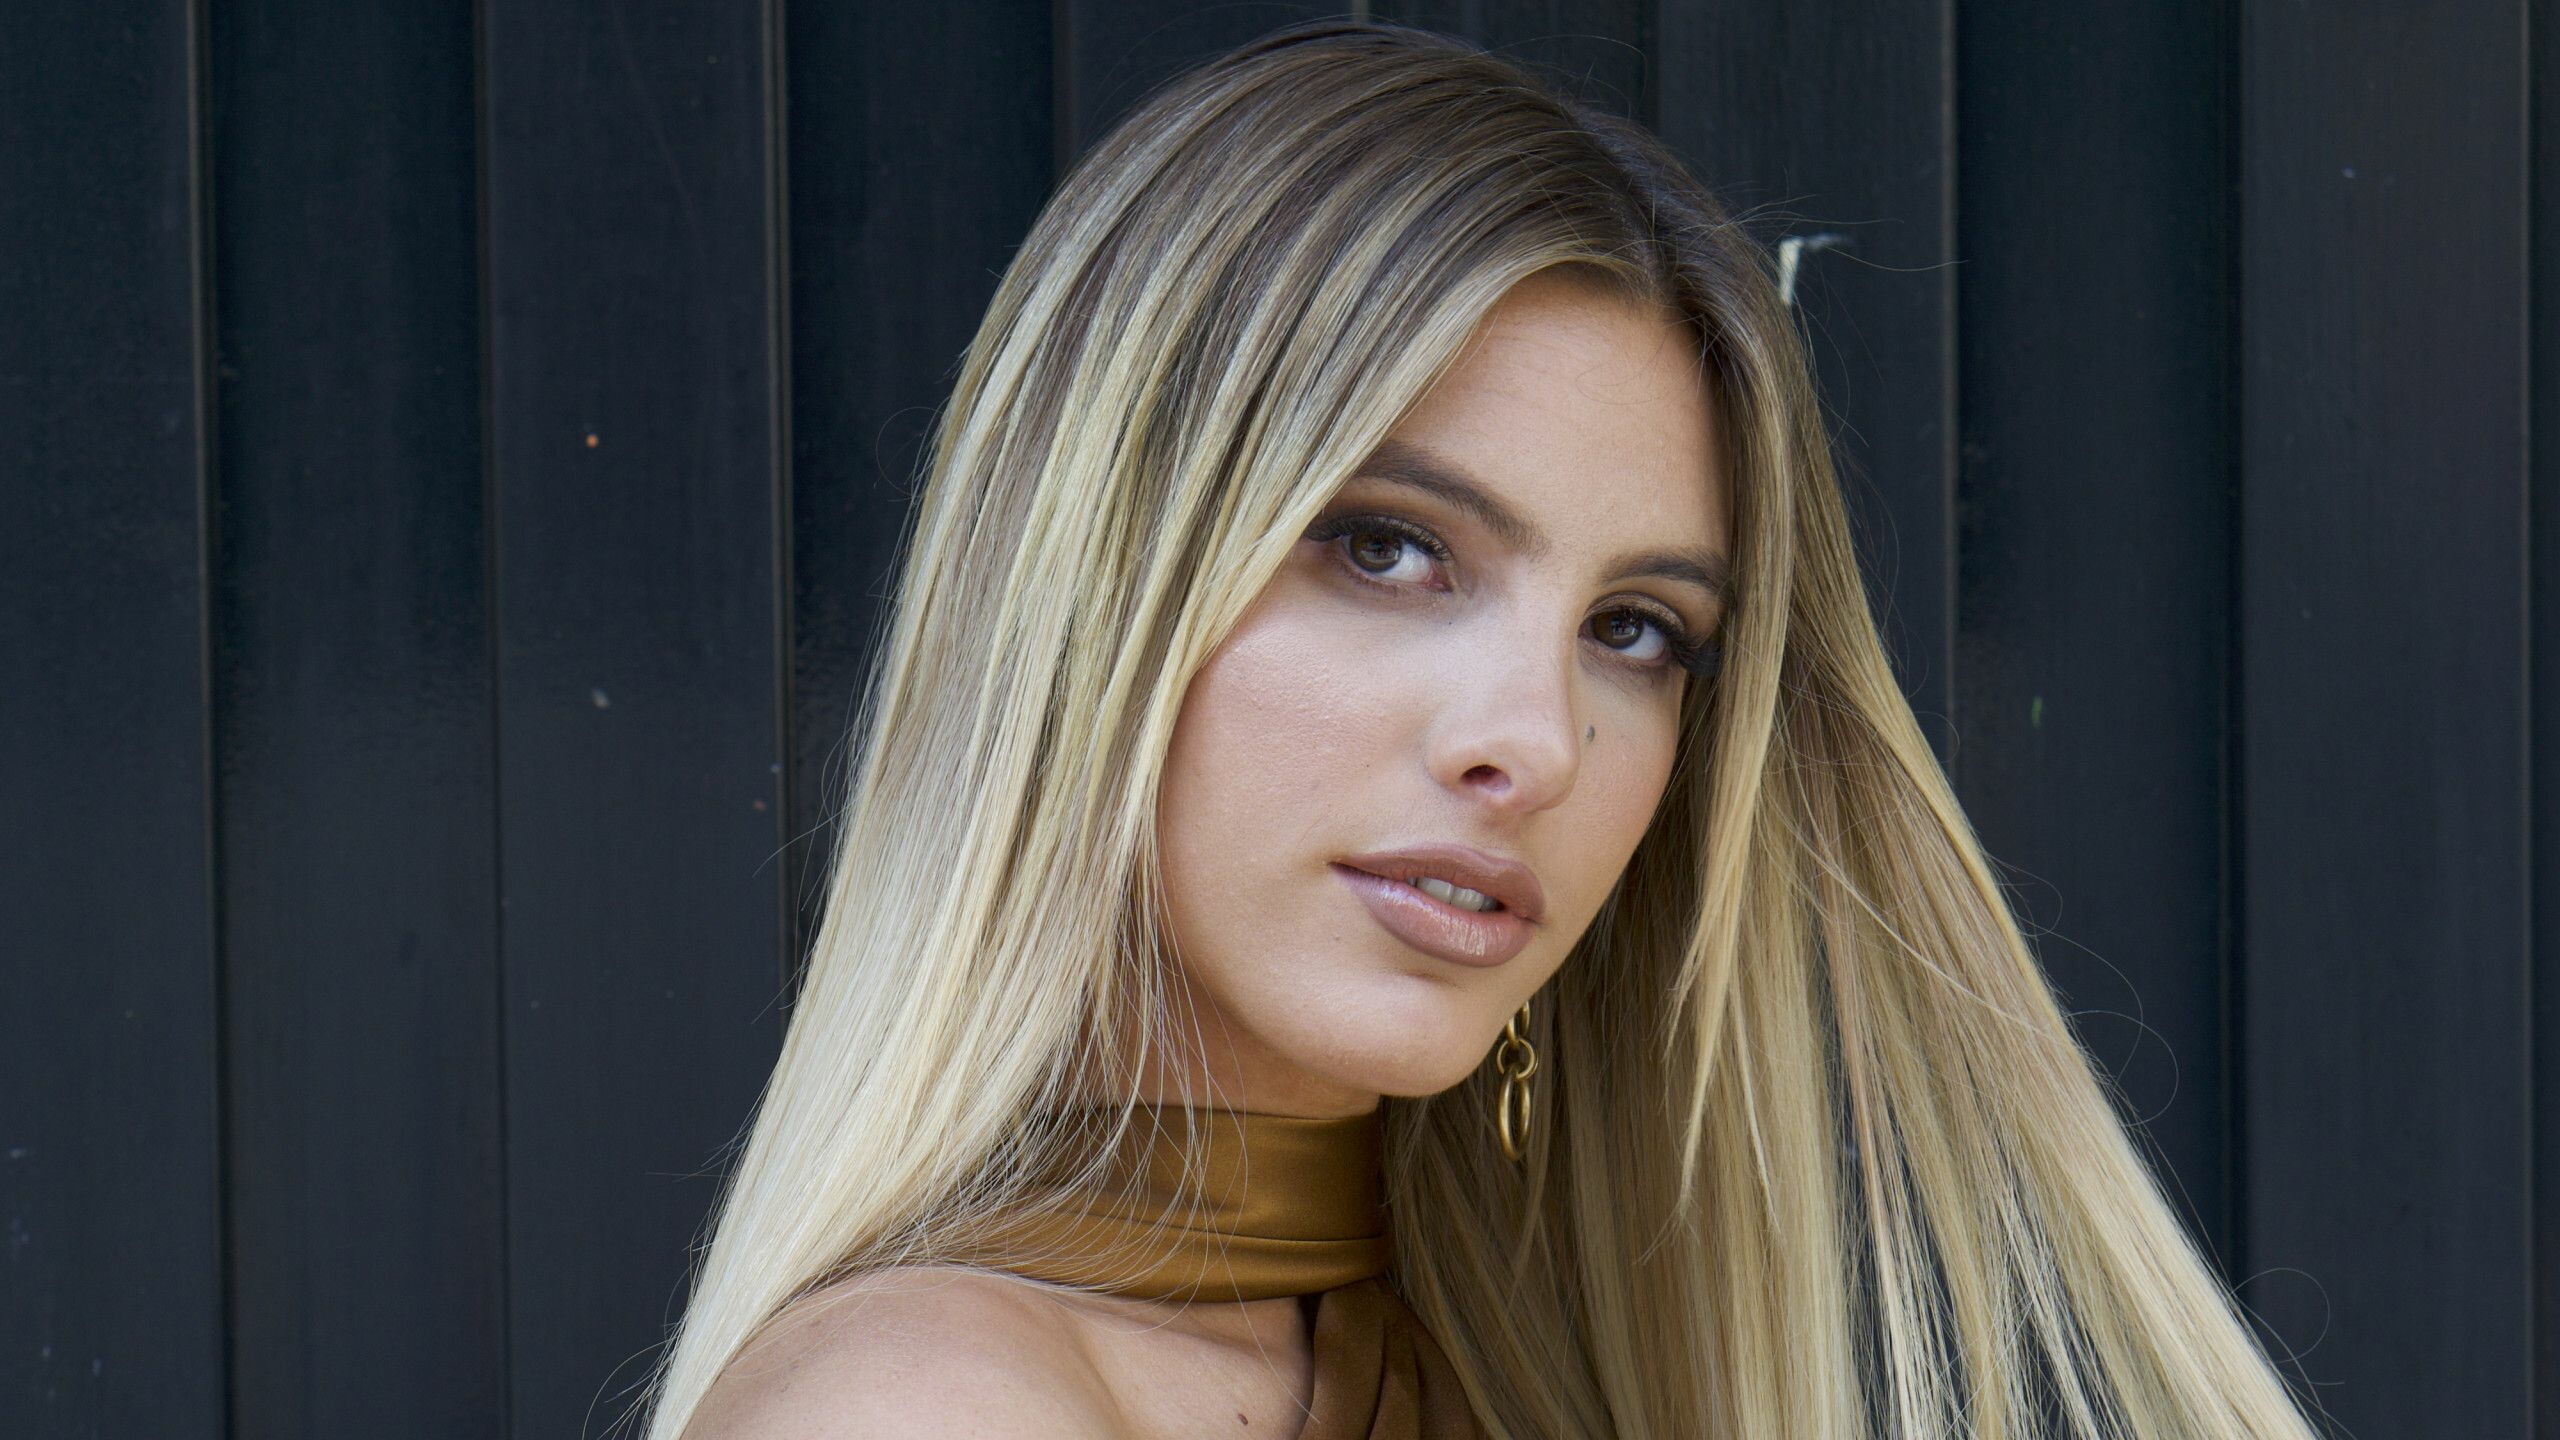 Lele Pons: Launched a jewelry collection called UNO Magnetic in 2015. 2560x1440 HD Wallpaper.